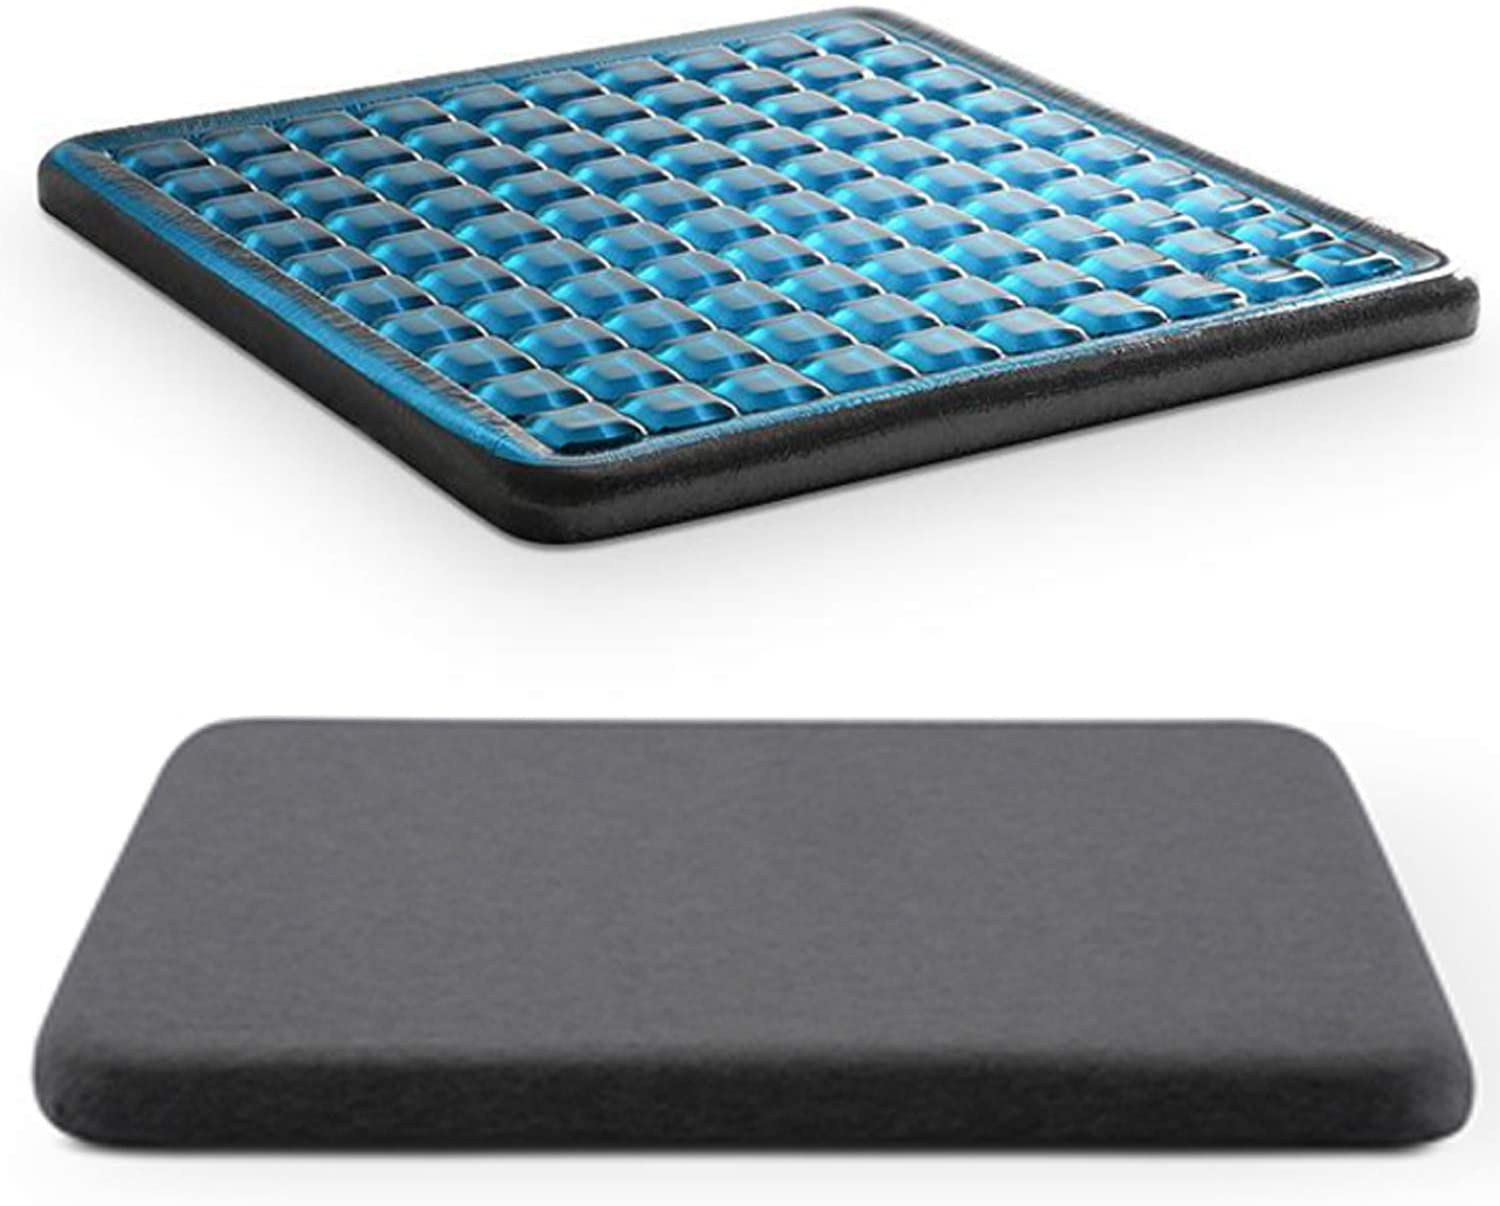 Gel Seat Cushion for Sciatica, Tailbone, Lower-Back Pain Relief